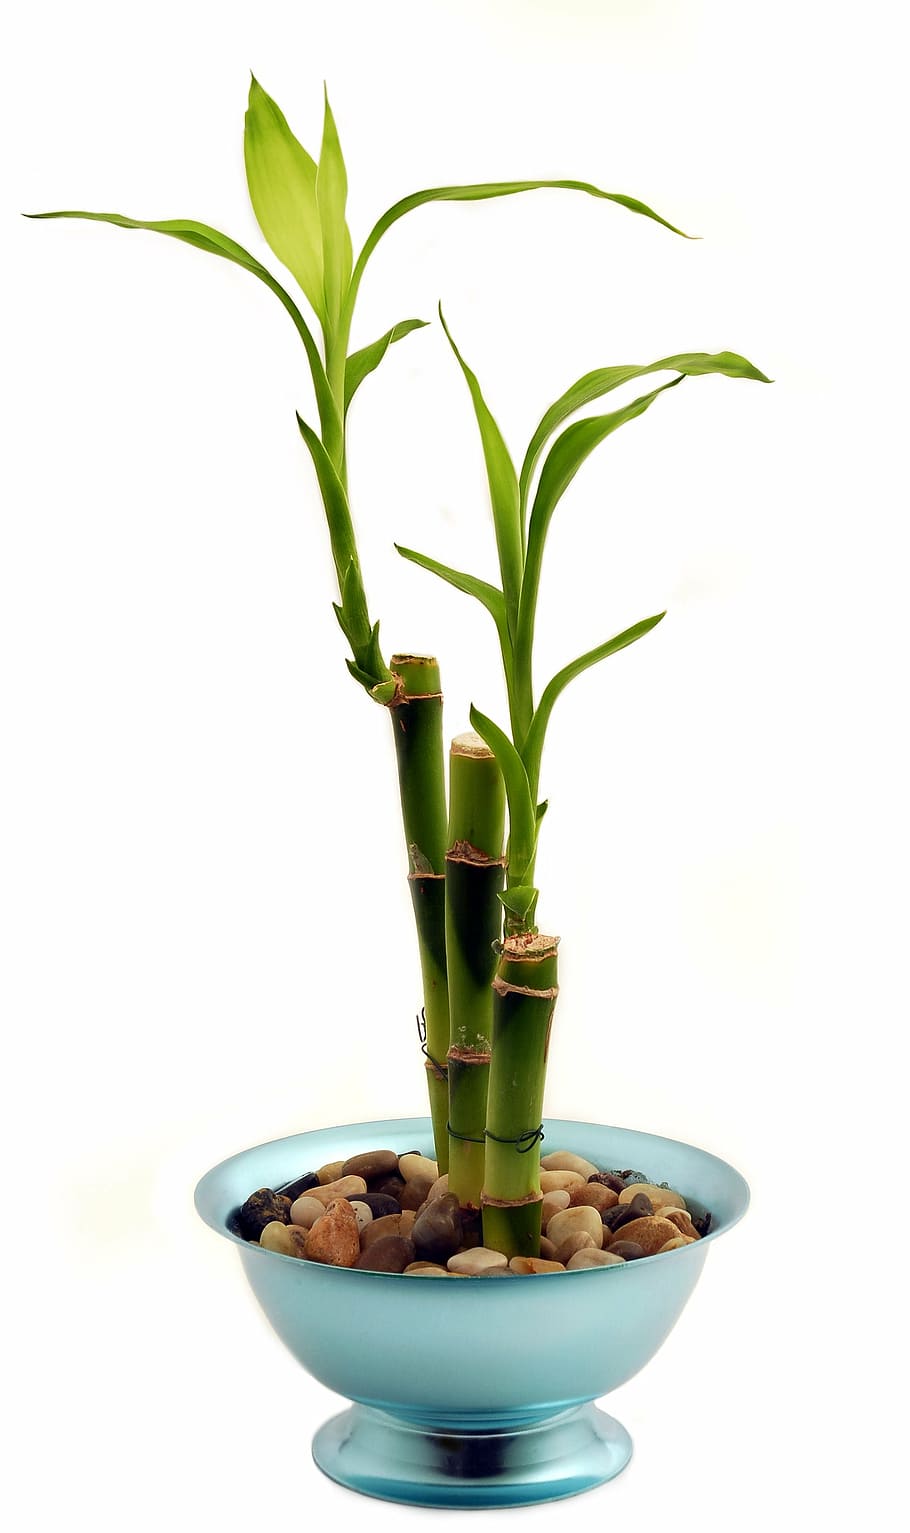 lucky bamboo, bamboo, houseplant, potted plant, vase, flower, plant, herbal medicine, indoors, nature